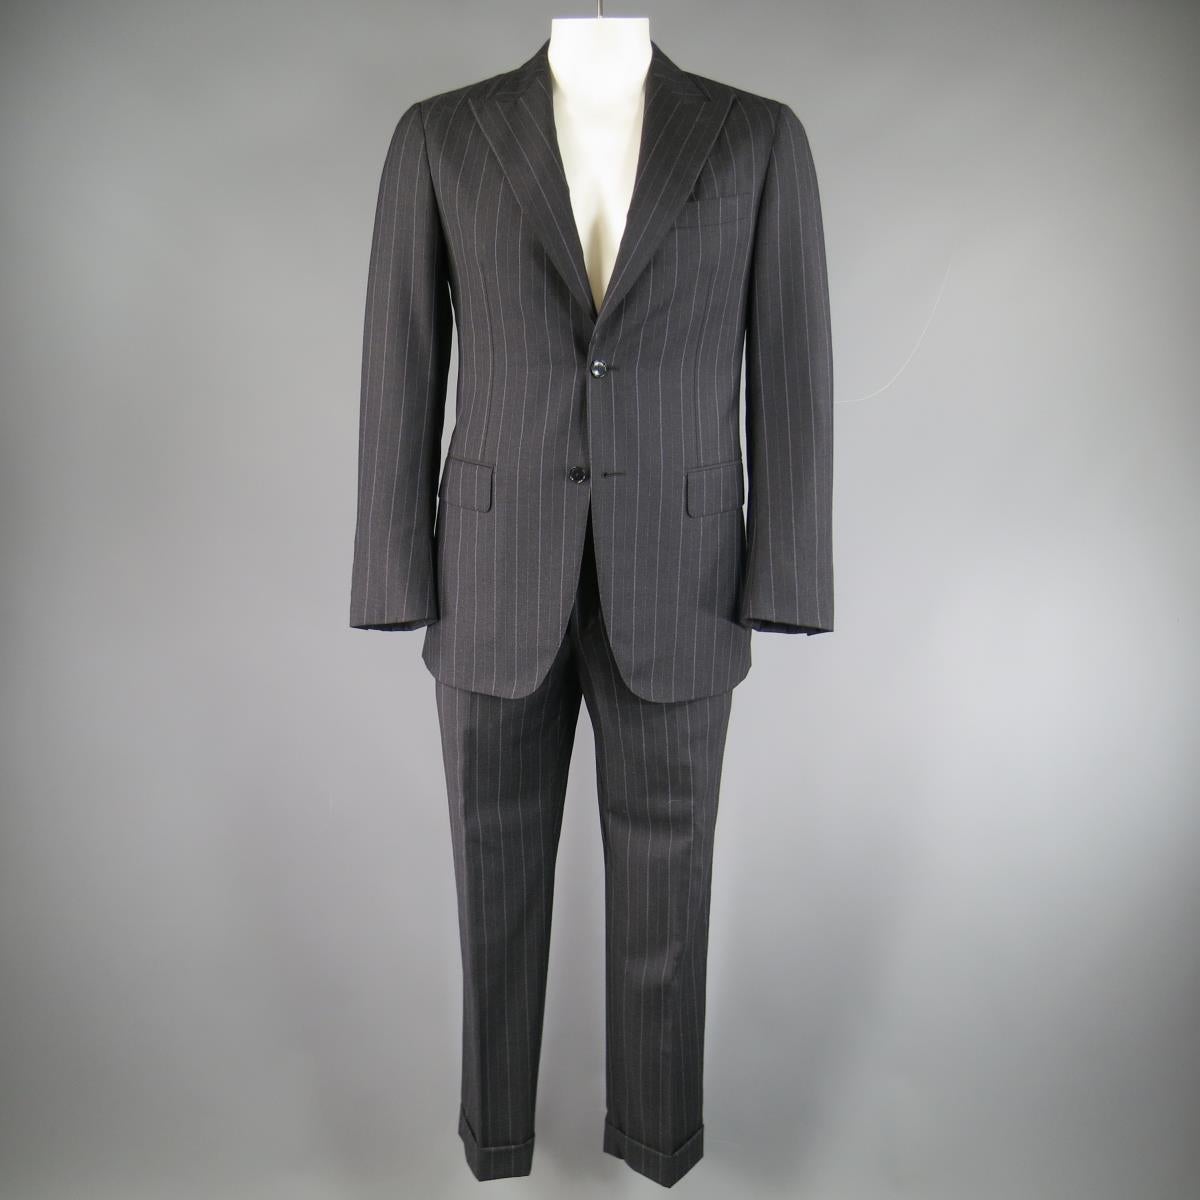 Classic PAL ZILERI suit in a charcoal gray wool cashmere blend with all over lavender chalk-stripe print includes a two button sport coat with wide peak lapel, flap pockets, functional button cuffs, and double vented back and matching tailored, flat